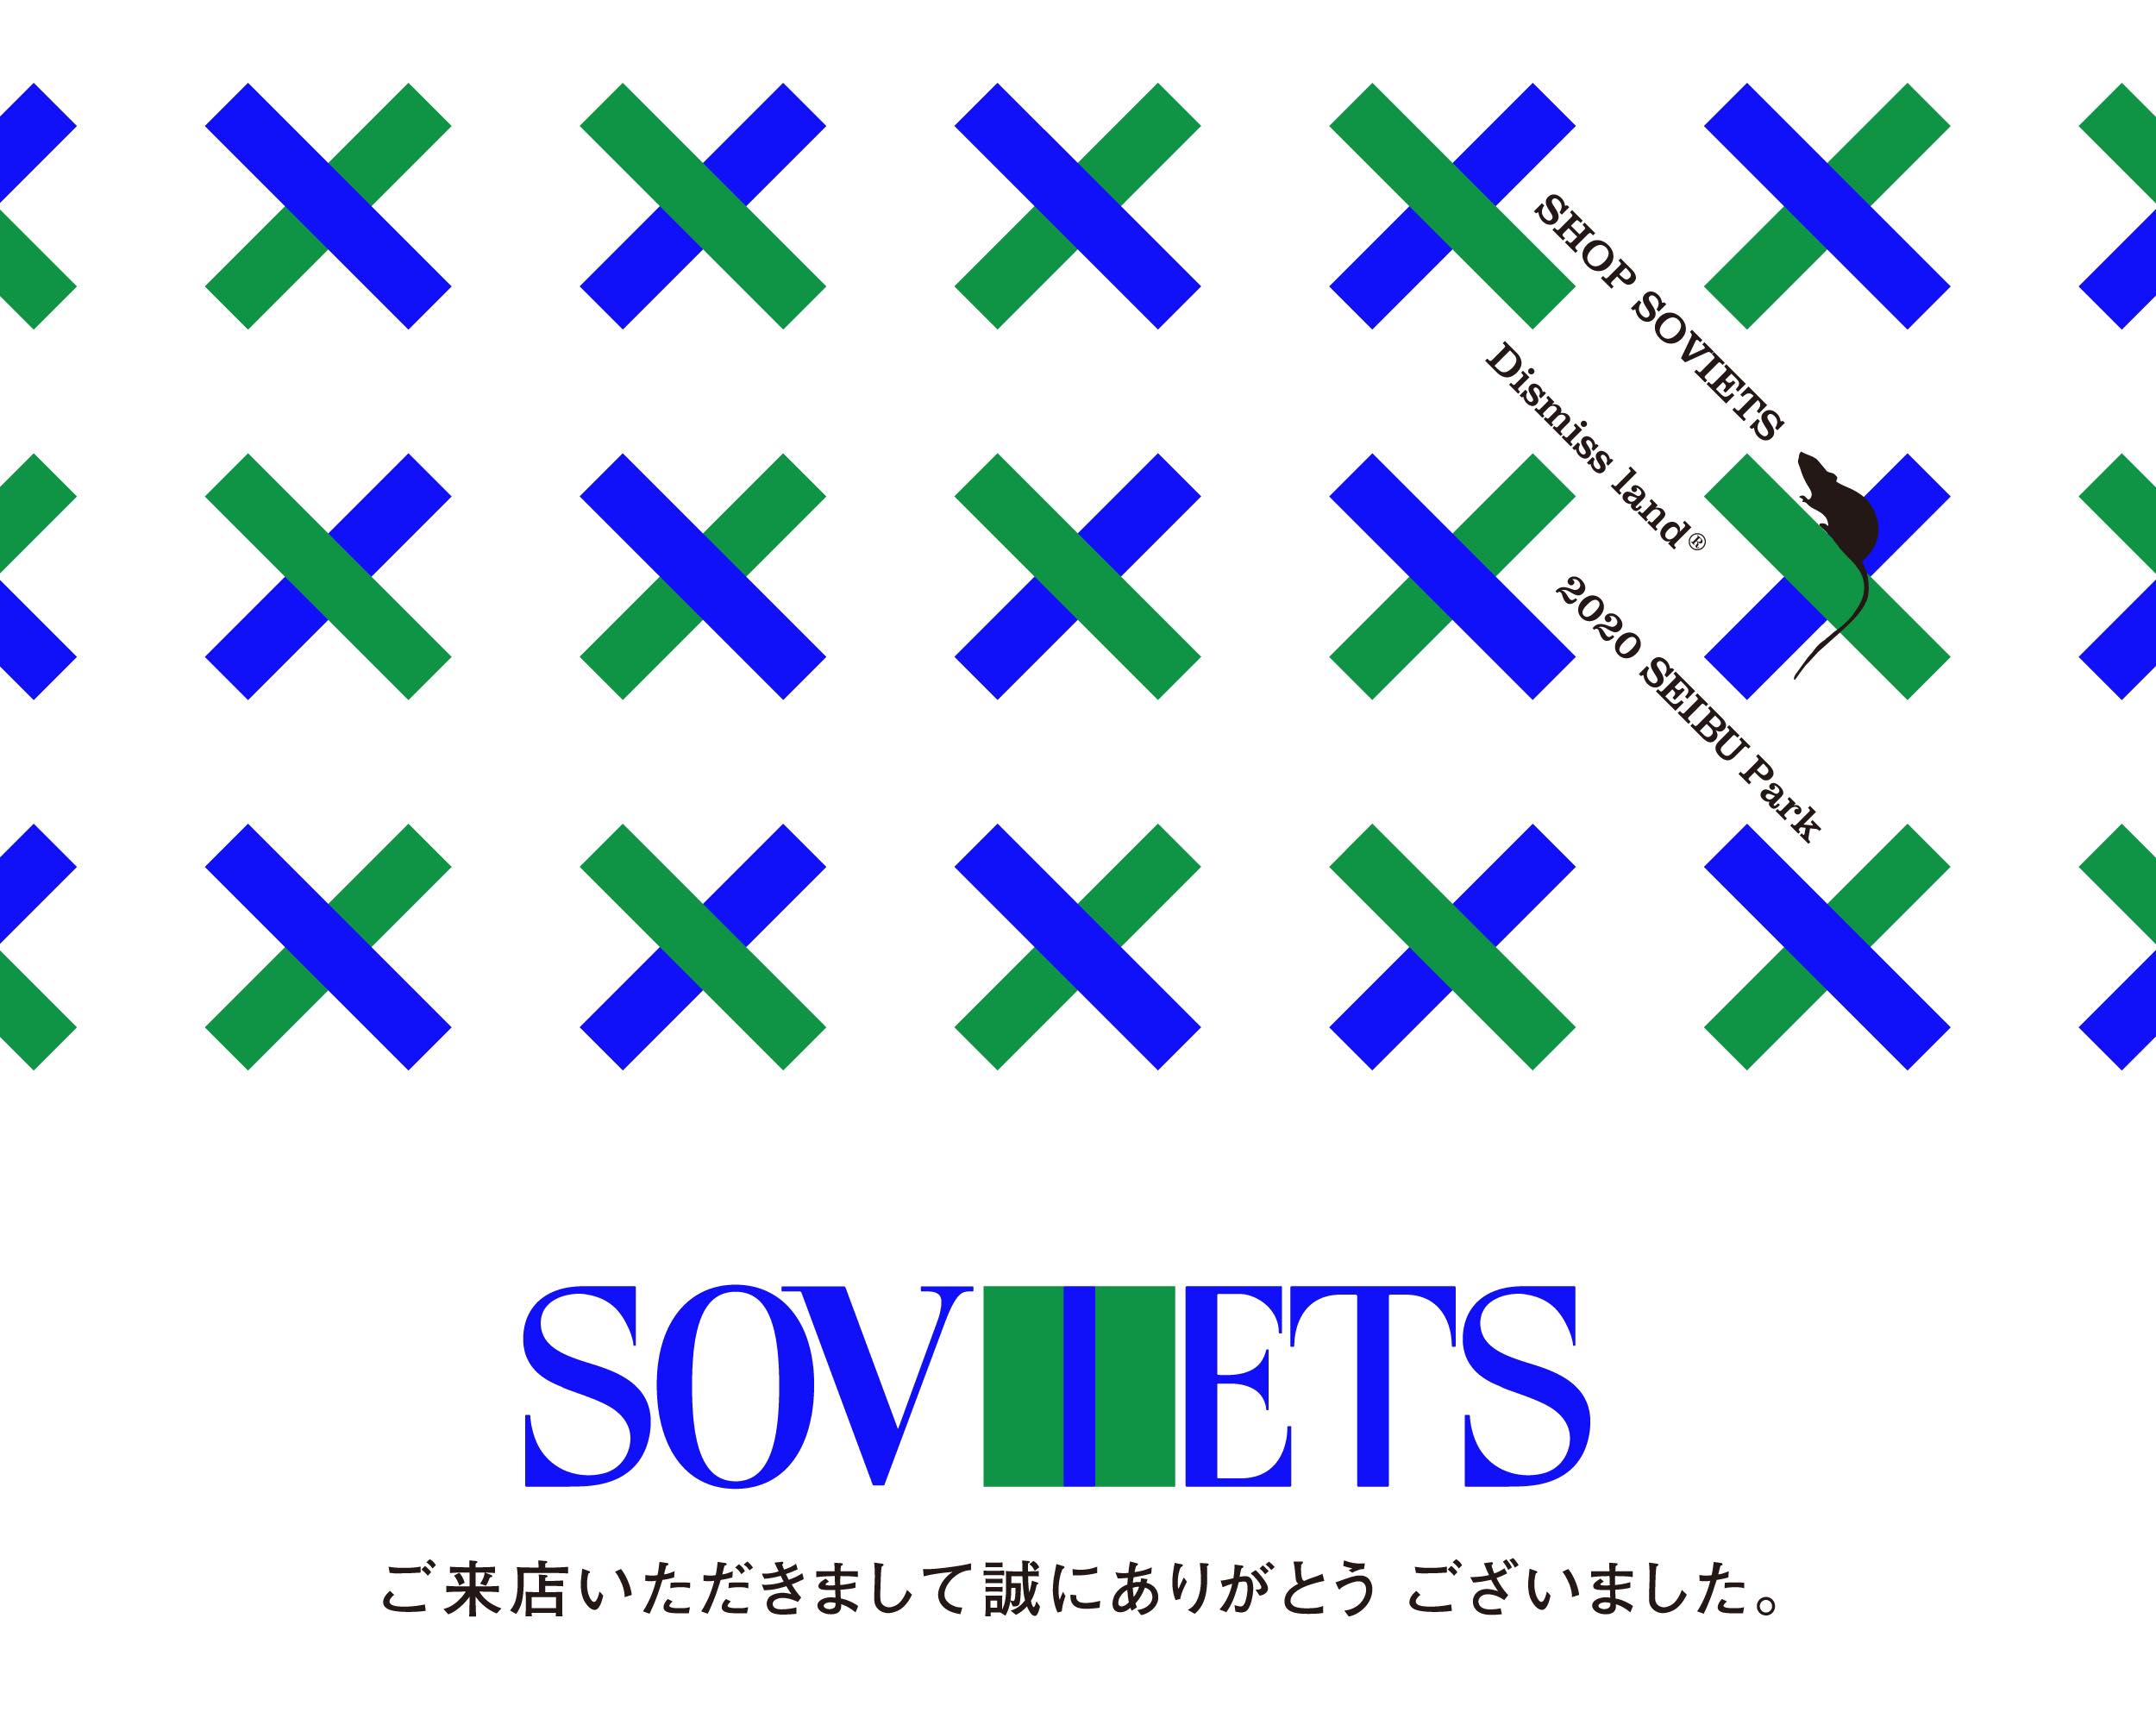 ＜SHOP SOVIETS in 西武池袋本店＞の営業が終了いたしました！　